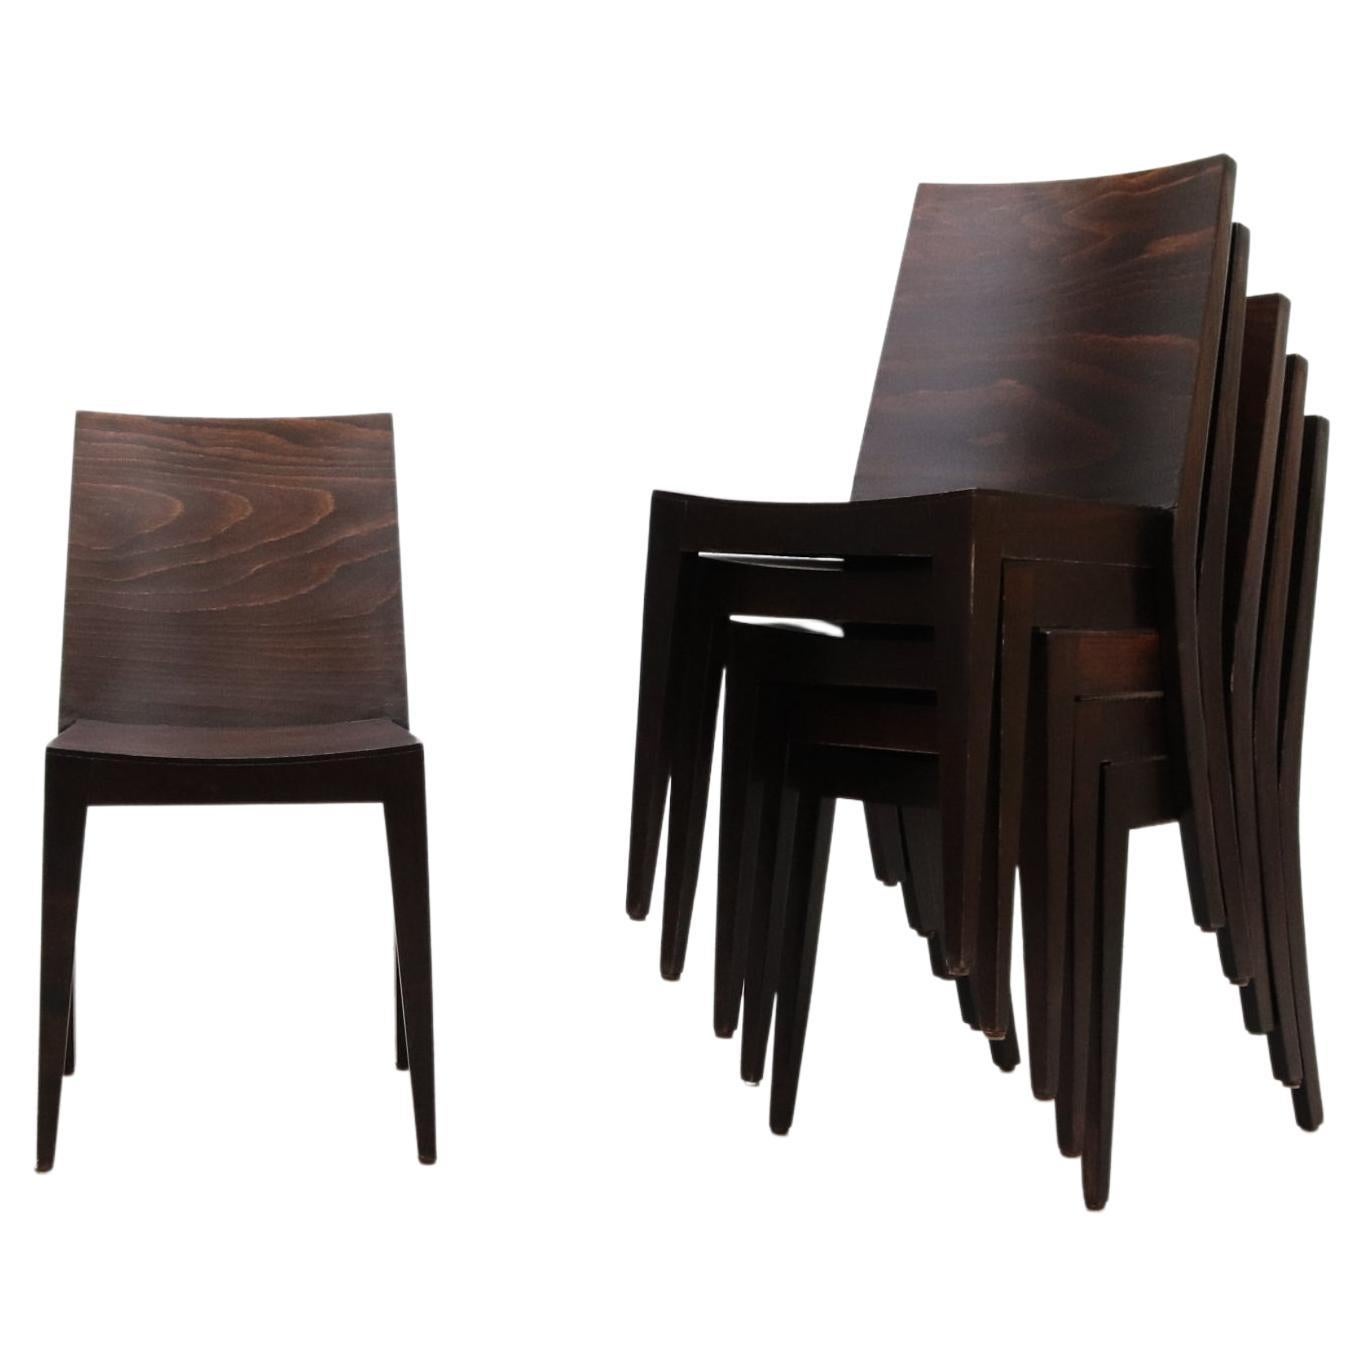 Modernist Philippe Starck Style Square Back Dark Stained Wood Stacking Chairs For Sale